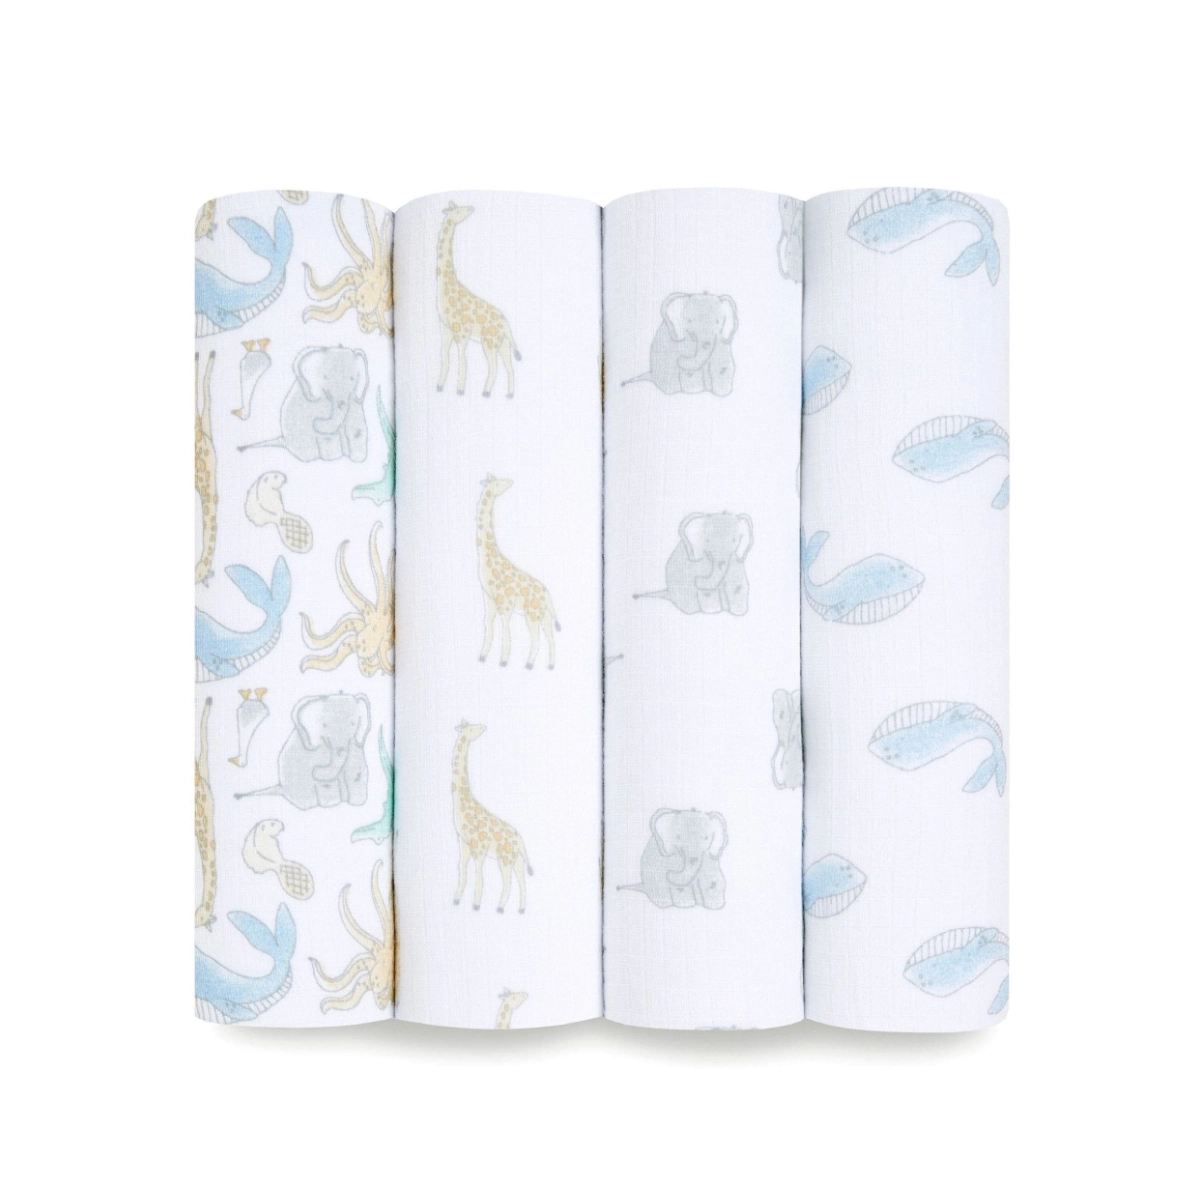 Image of Aden + Anais Pack of 4 Essentials Cotton Muslin Swaddle Blanket - Natural History (23-19-243)